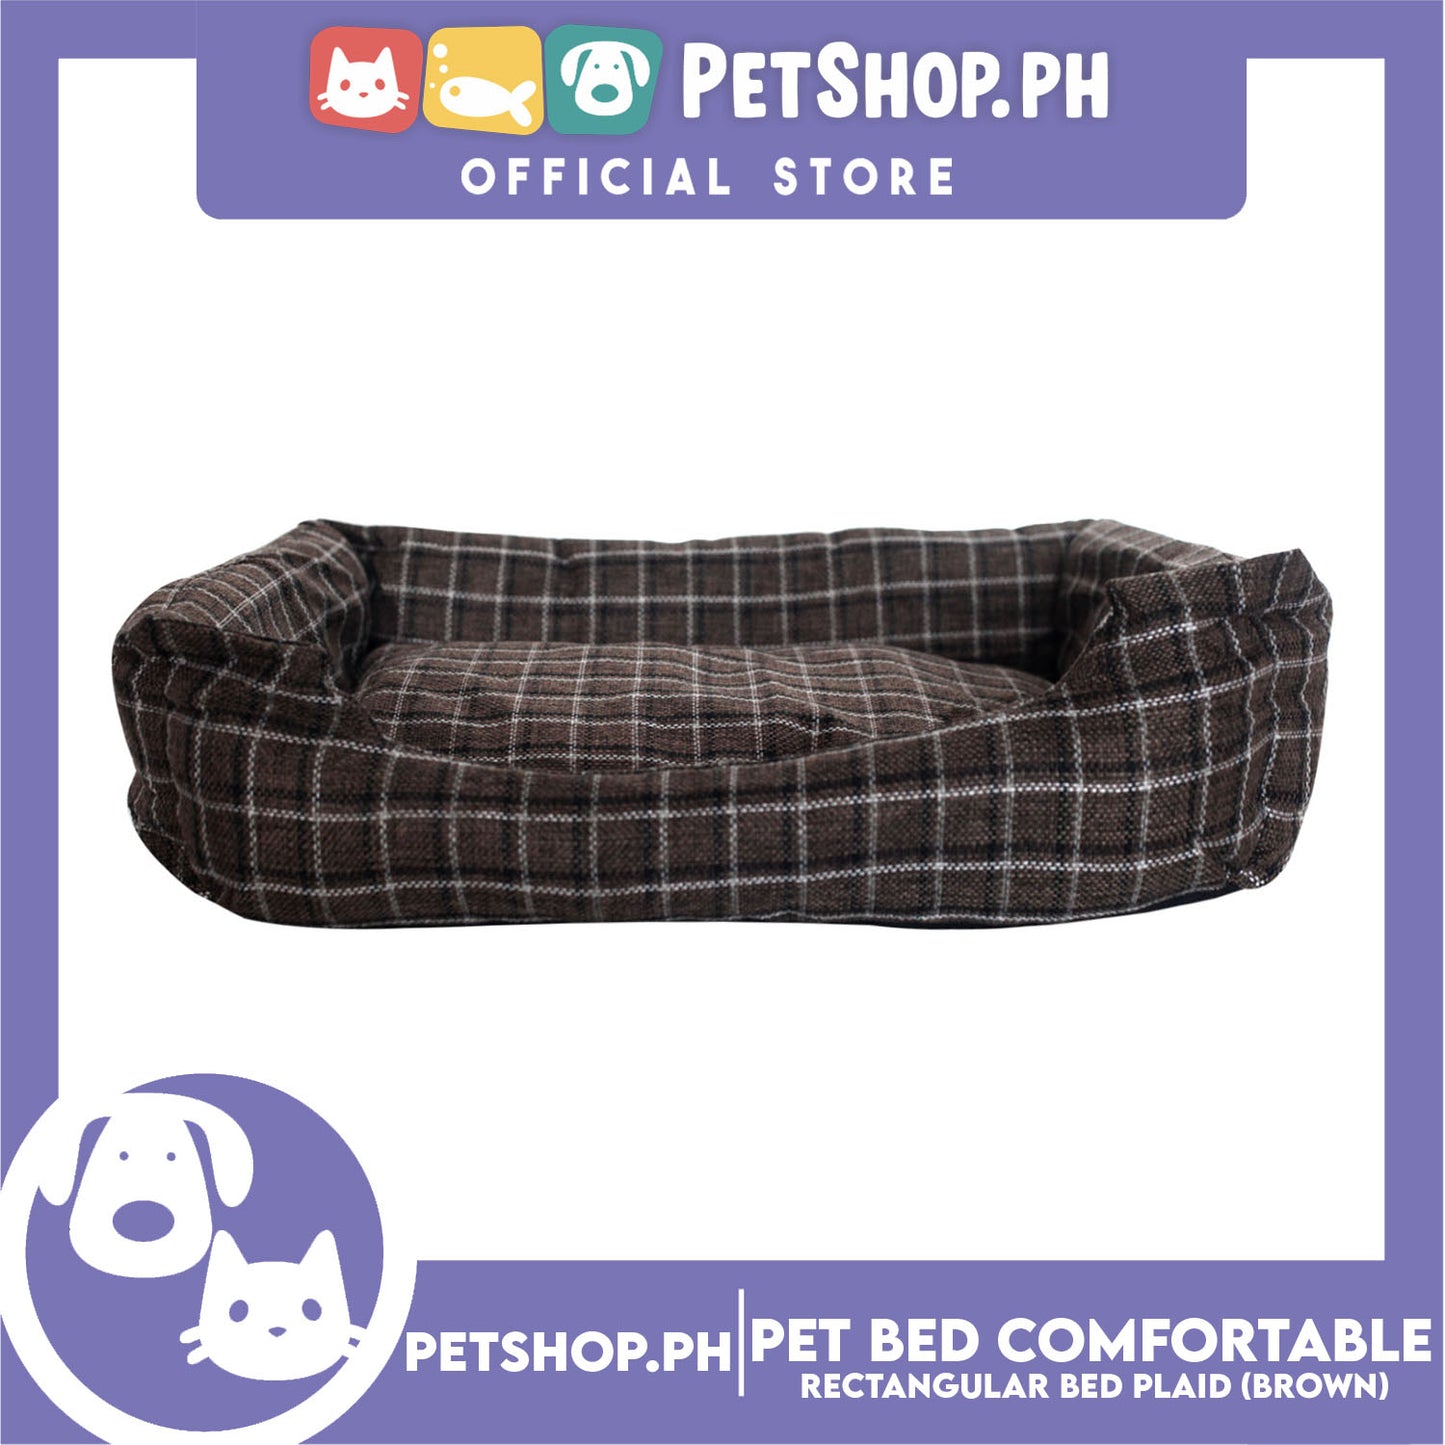 Pet Bed Comfortable Rectangular Pet Bed Plaid Design 63x50x10cm Large for Dogs & Cats (Brown)